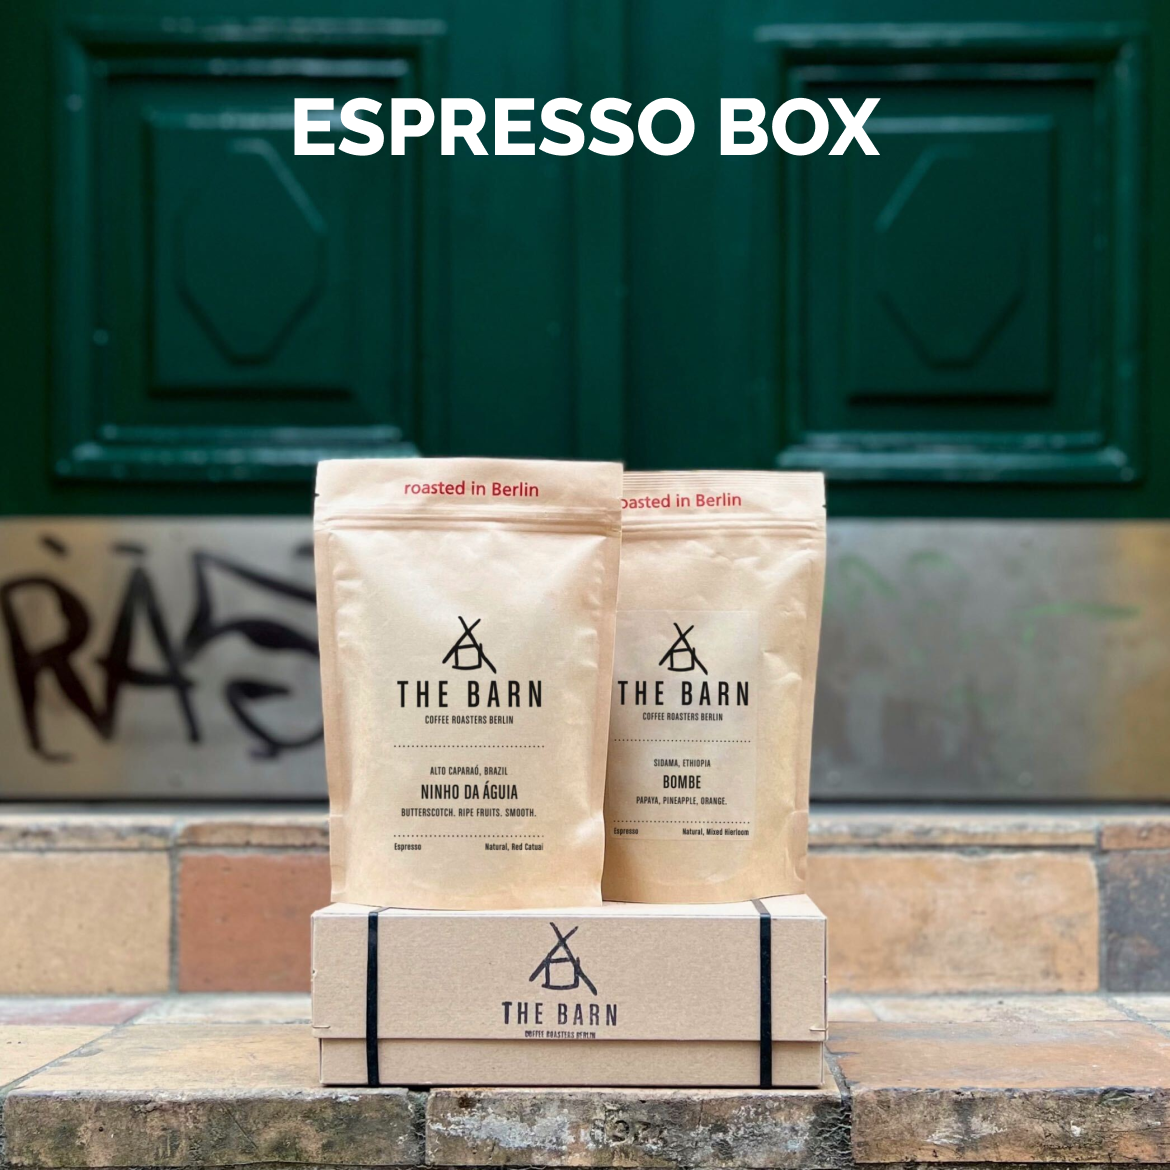 12 months curated subscription - Two 250g bags of freshly roasted espresso coffee beans: Ninho da Aguia and Bombe on a packaging box from THE BARN Coffee Roasters